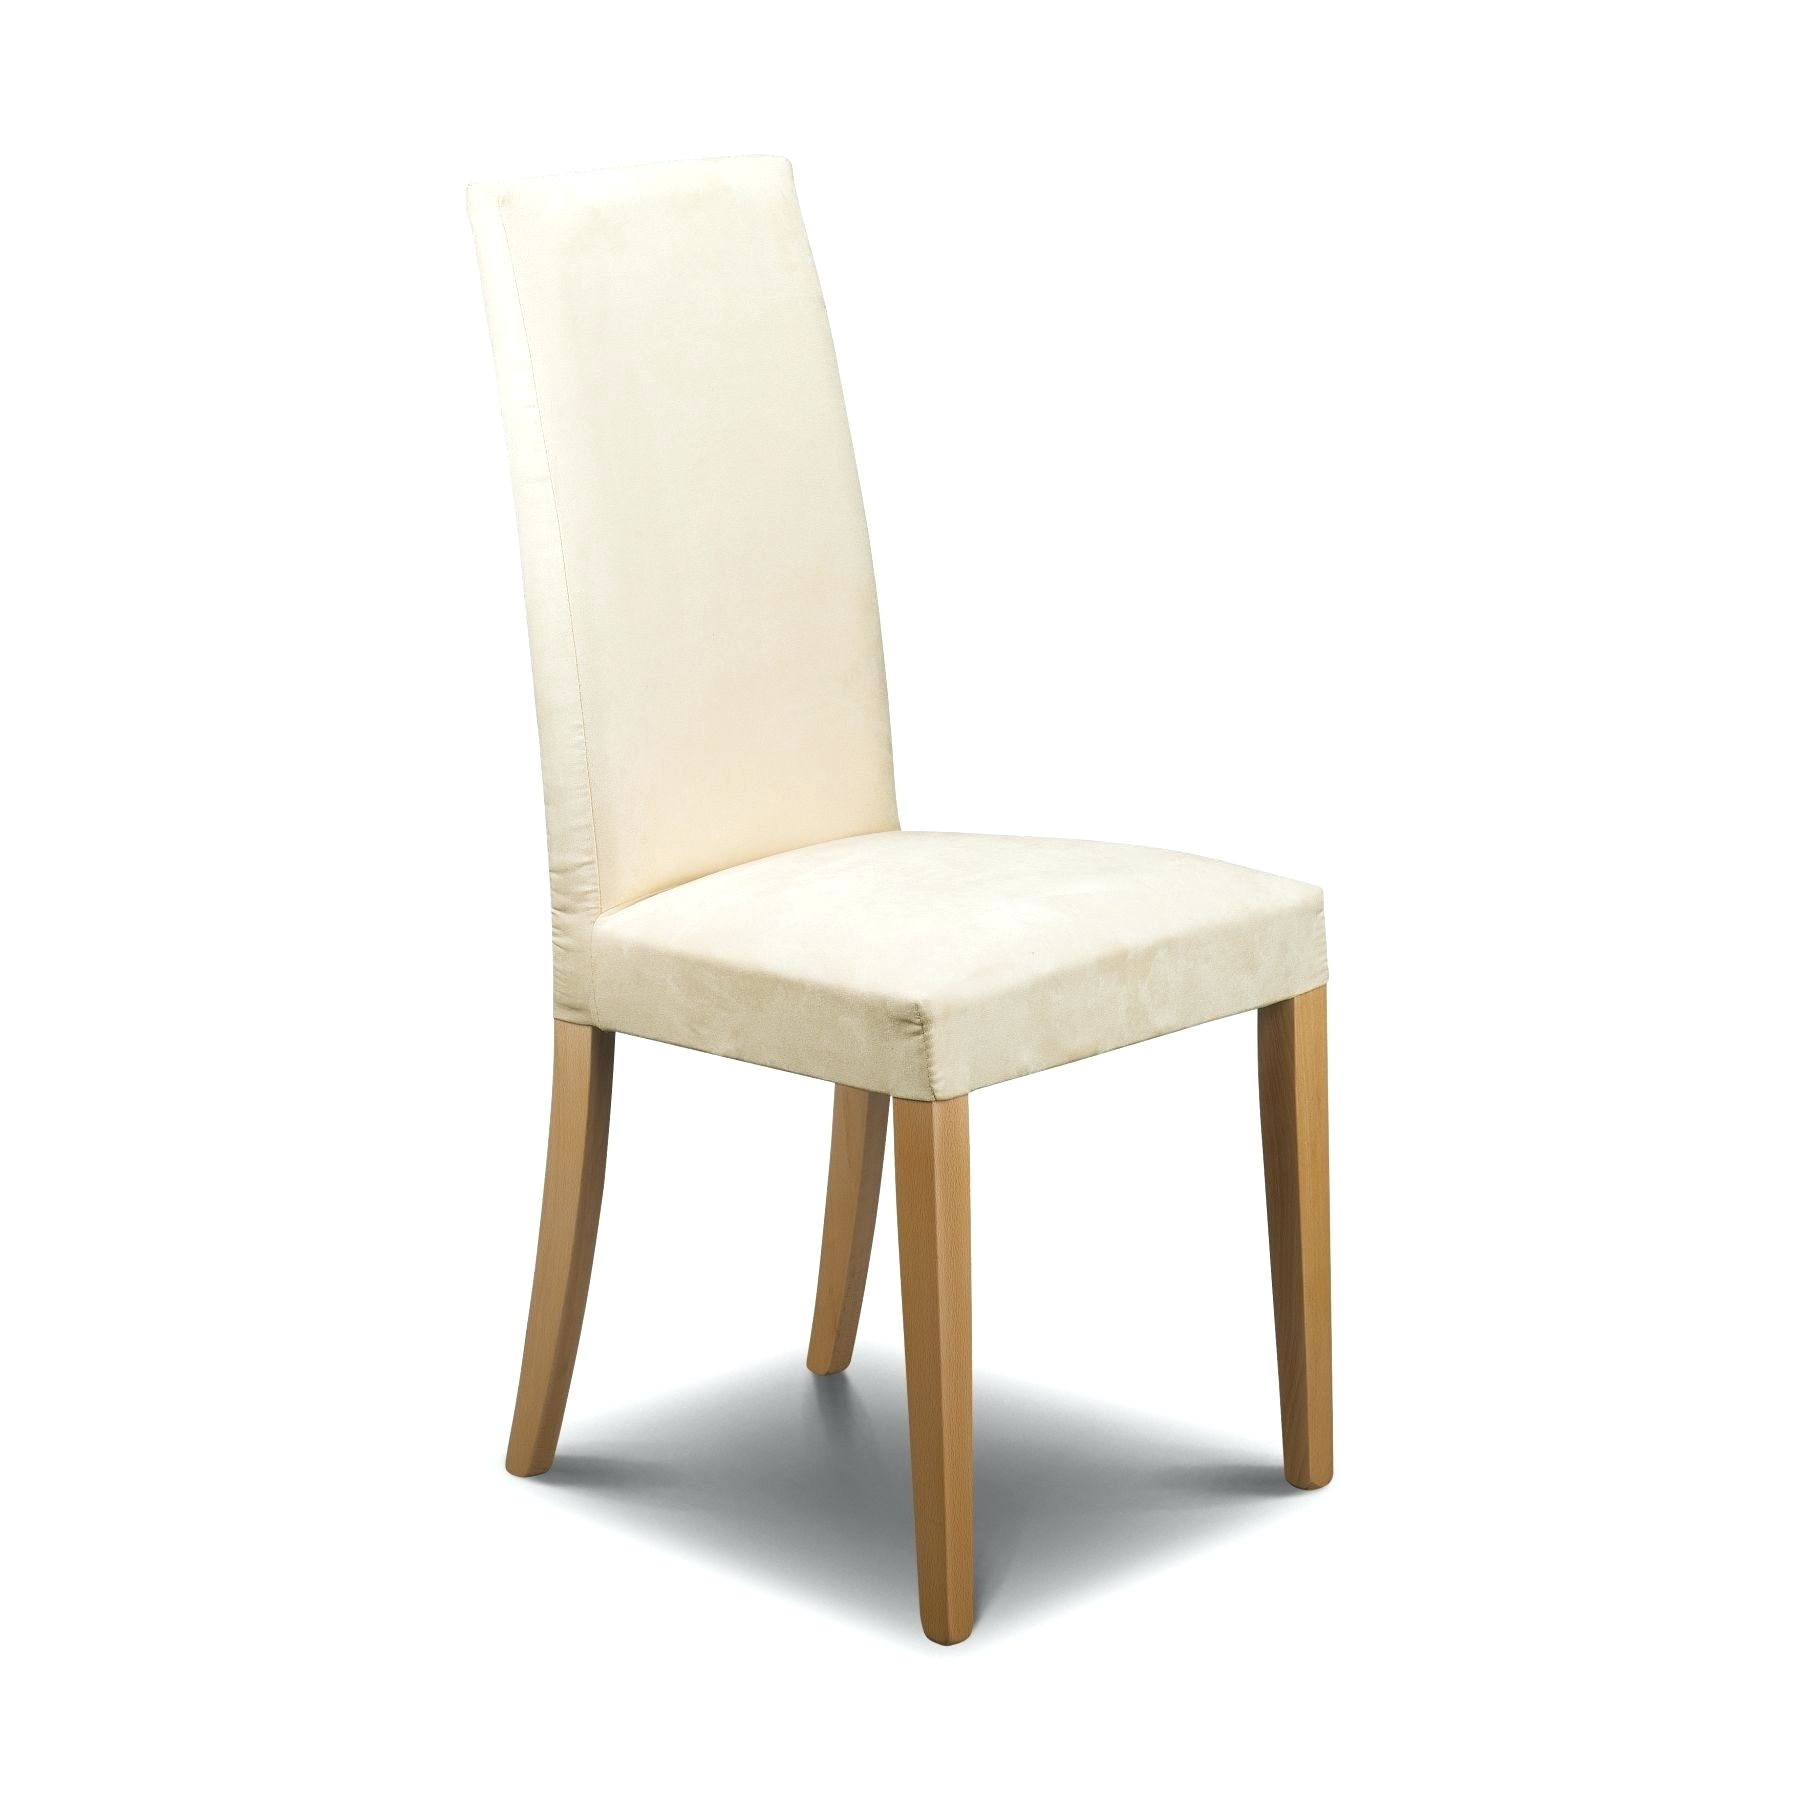 Church Chairs with Arms Uk Chair Dining Room Arm Chairs Upholstered Skilful Pic Of Chair with